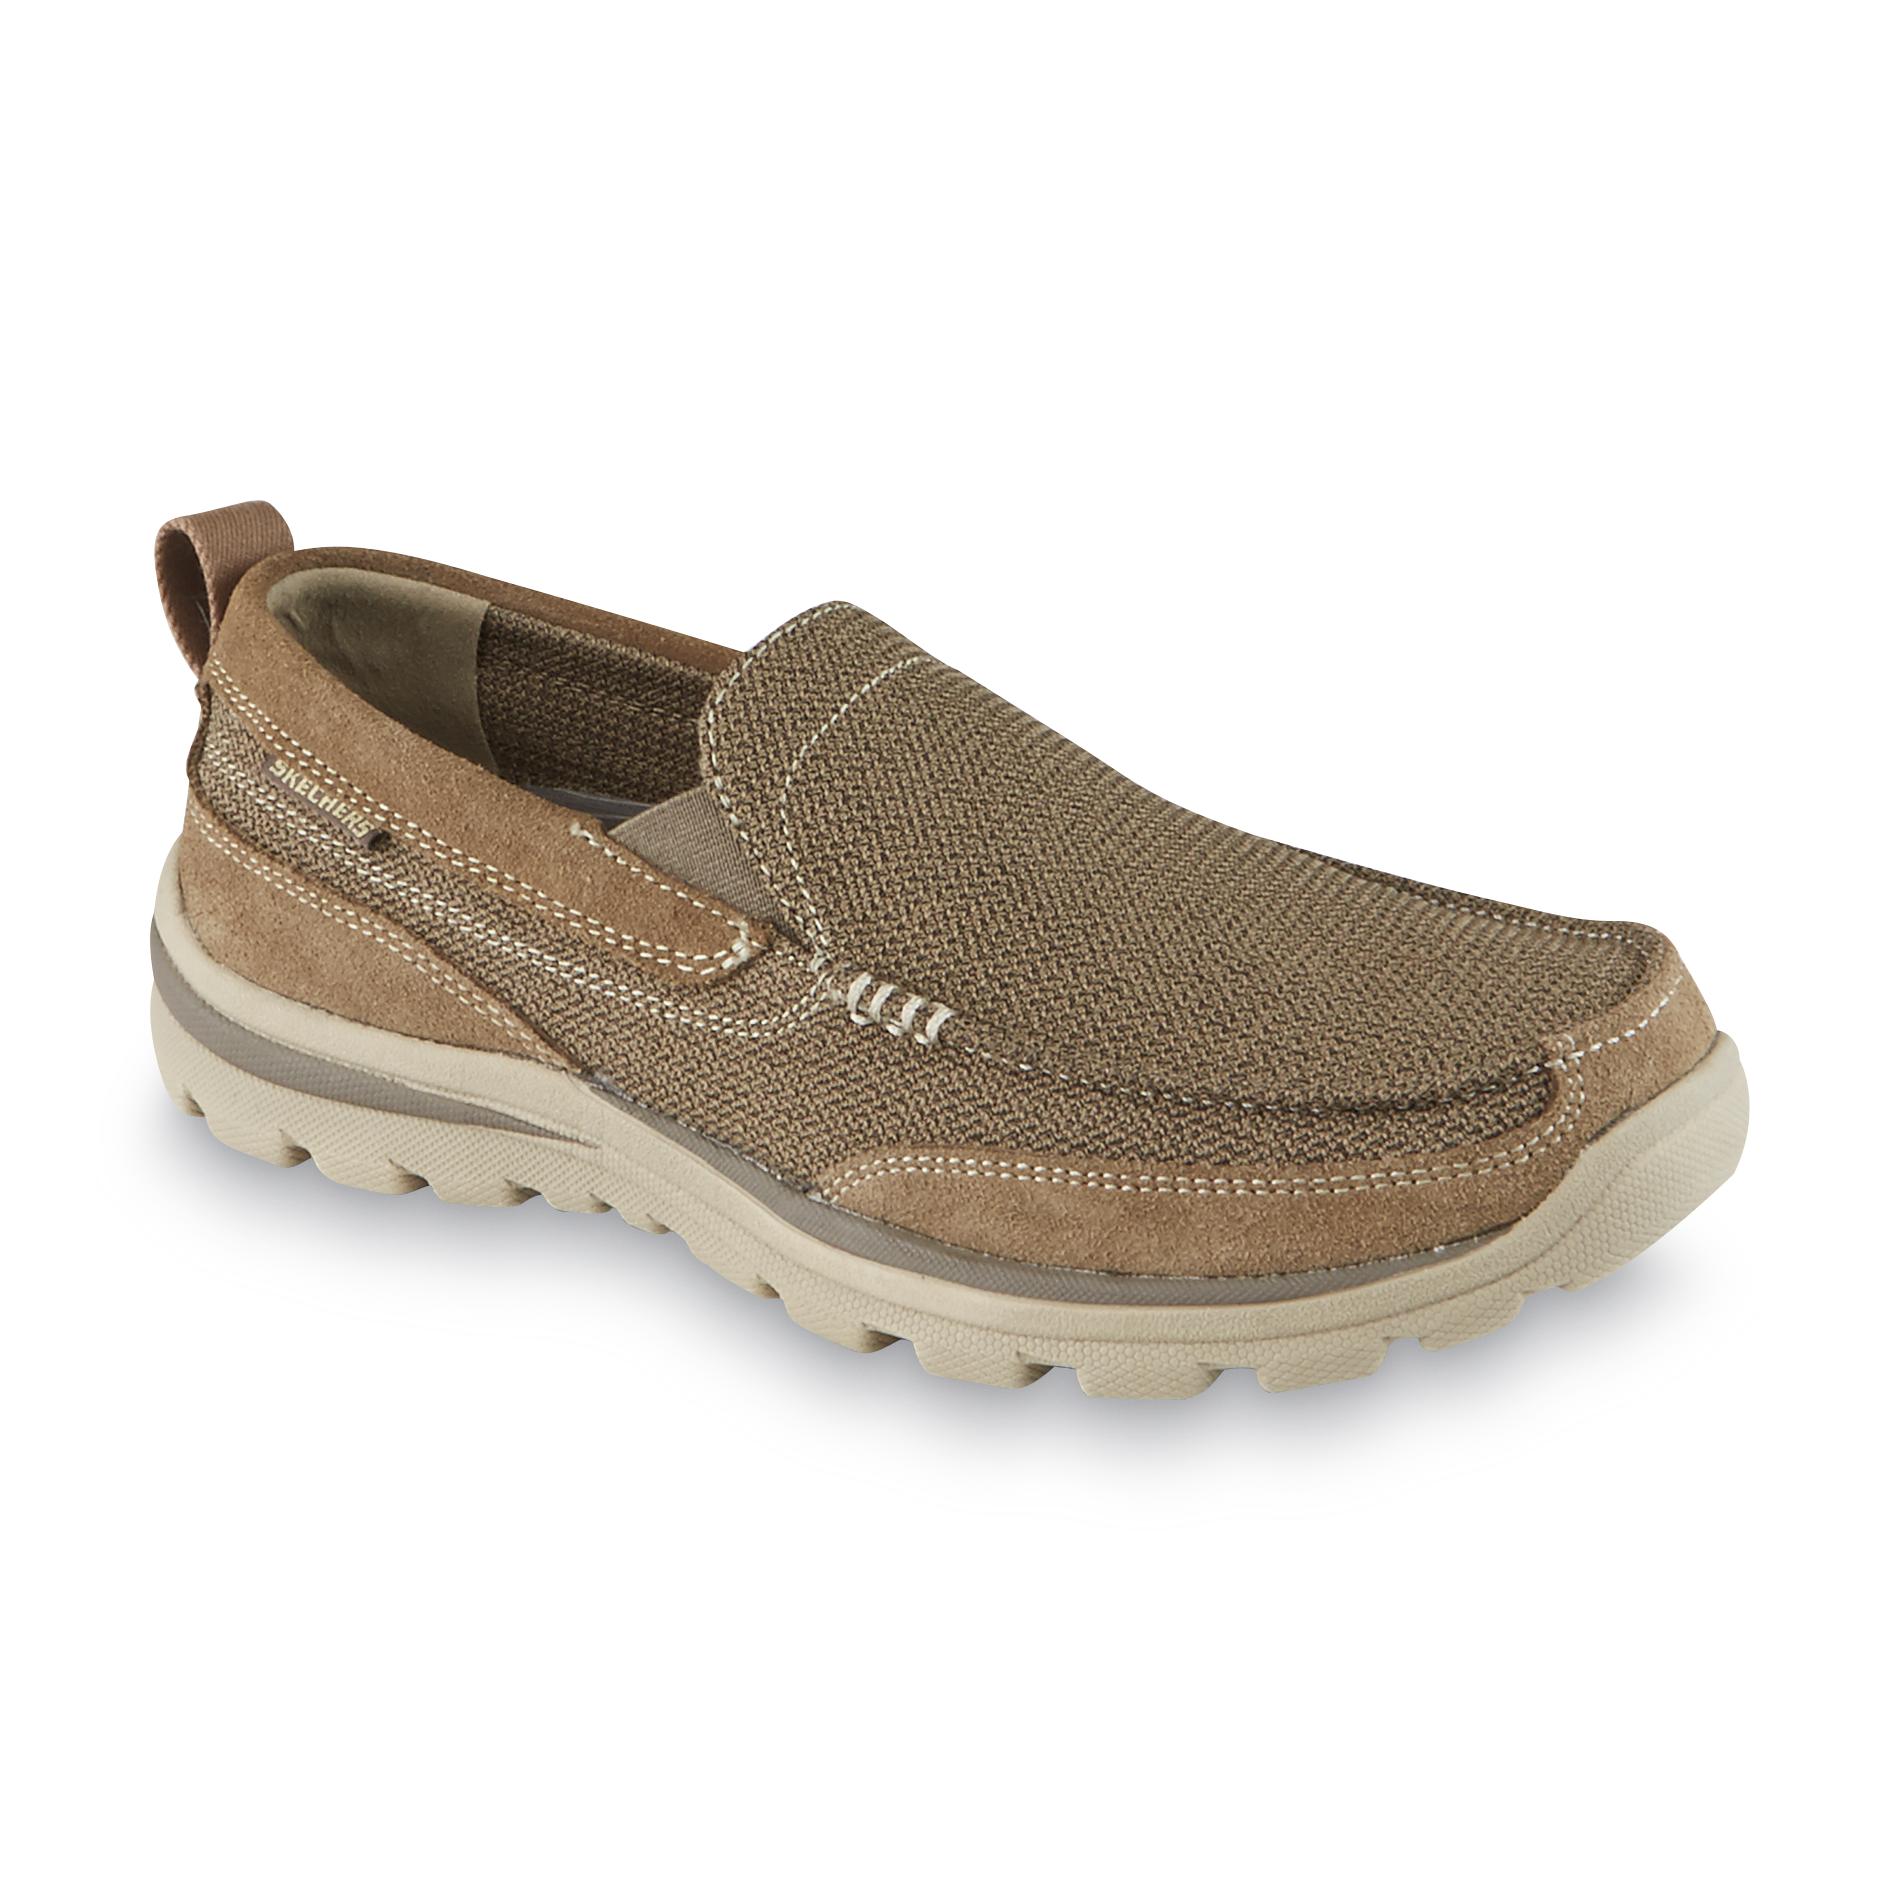 Skechers Men's Milford Brown Relaxed Fit Loafer - Clothing, Shoes ...